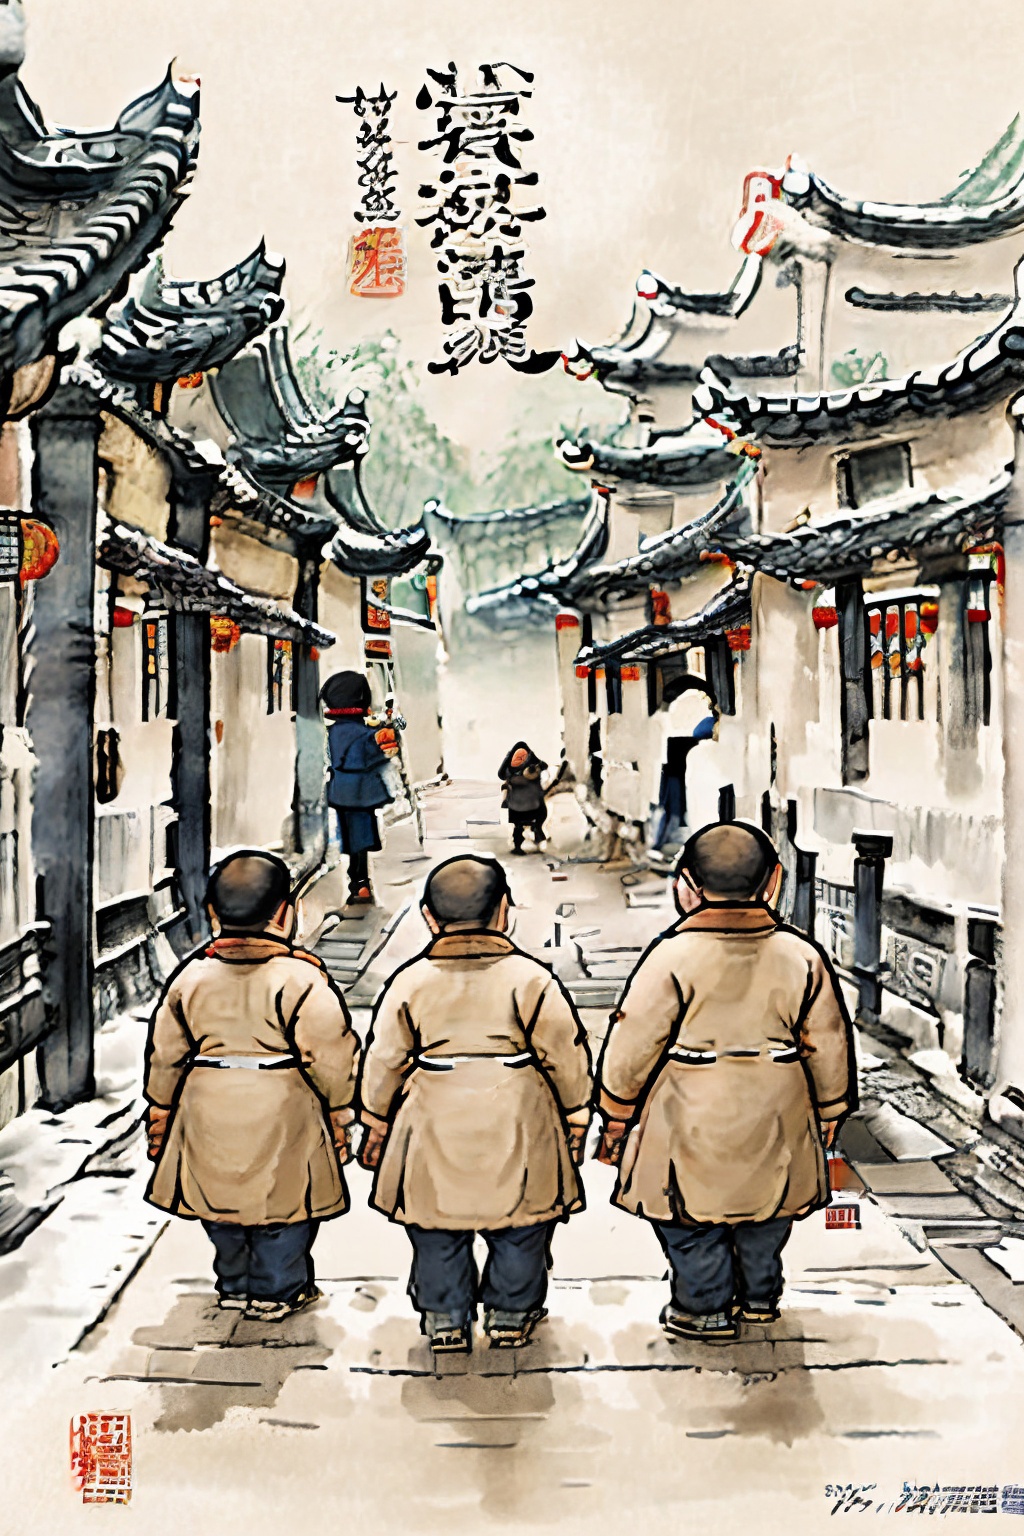 Chinese painting style image by hahafofo